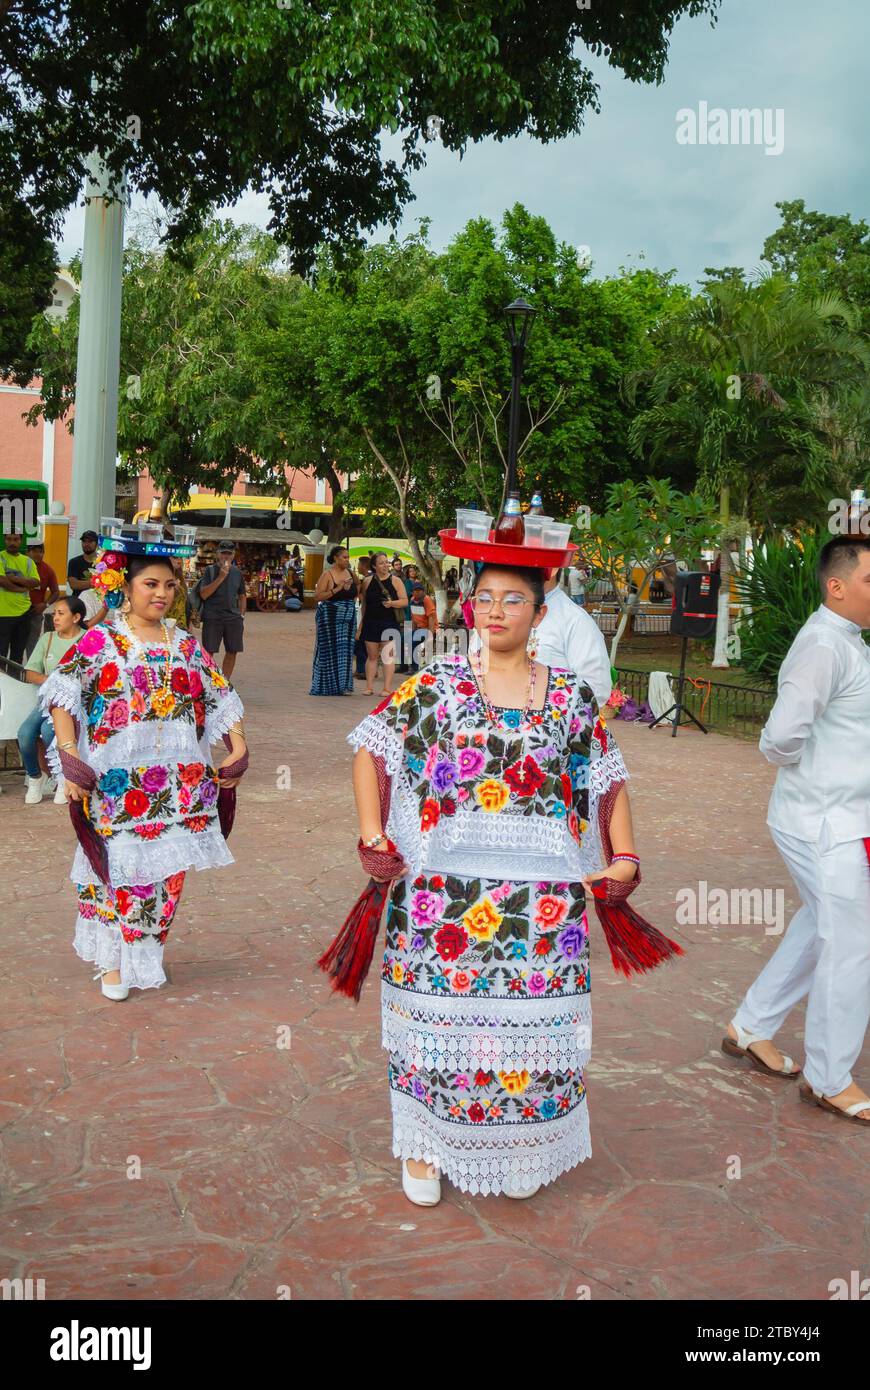 Valladolid, Yucatan, Mexico, Hupil people dancing at a zocalo of Valladolid, Editorial only. Stock Photo